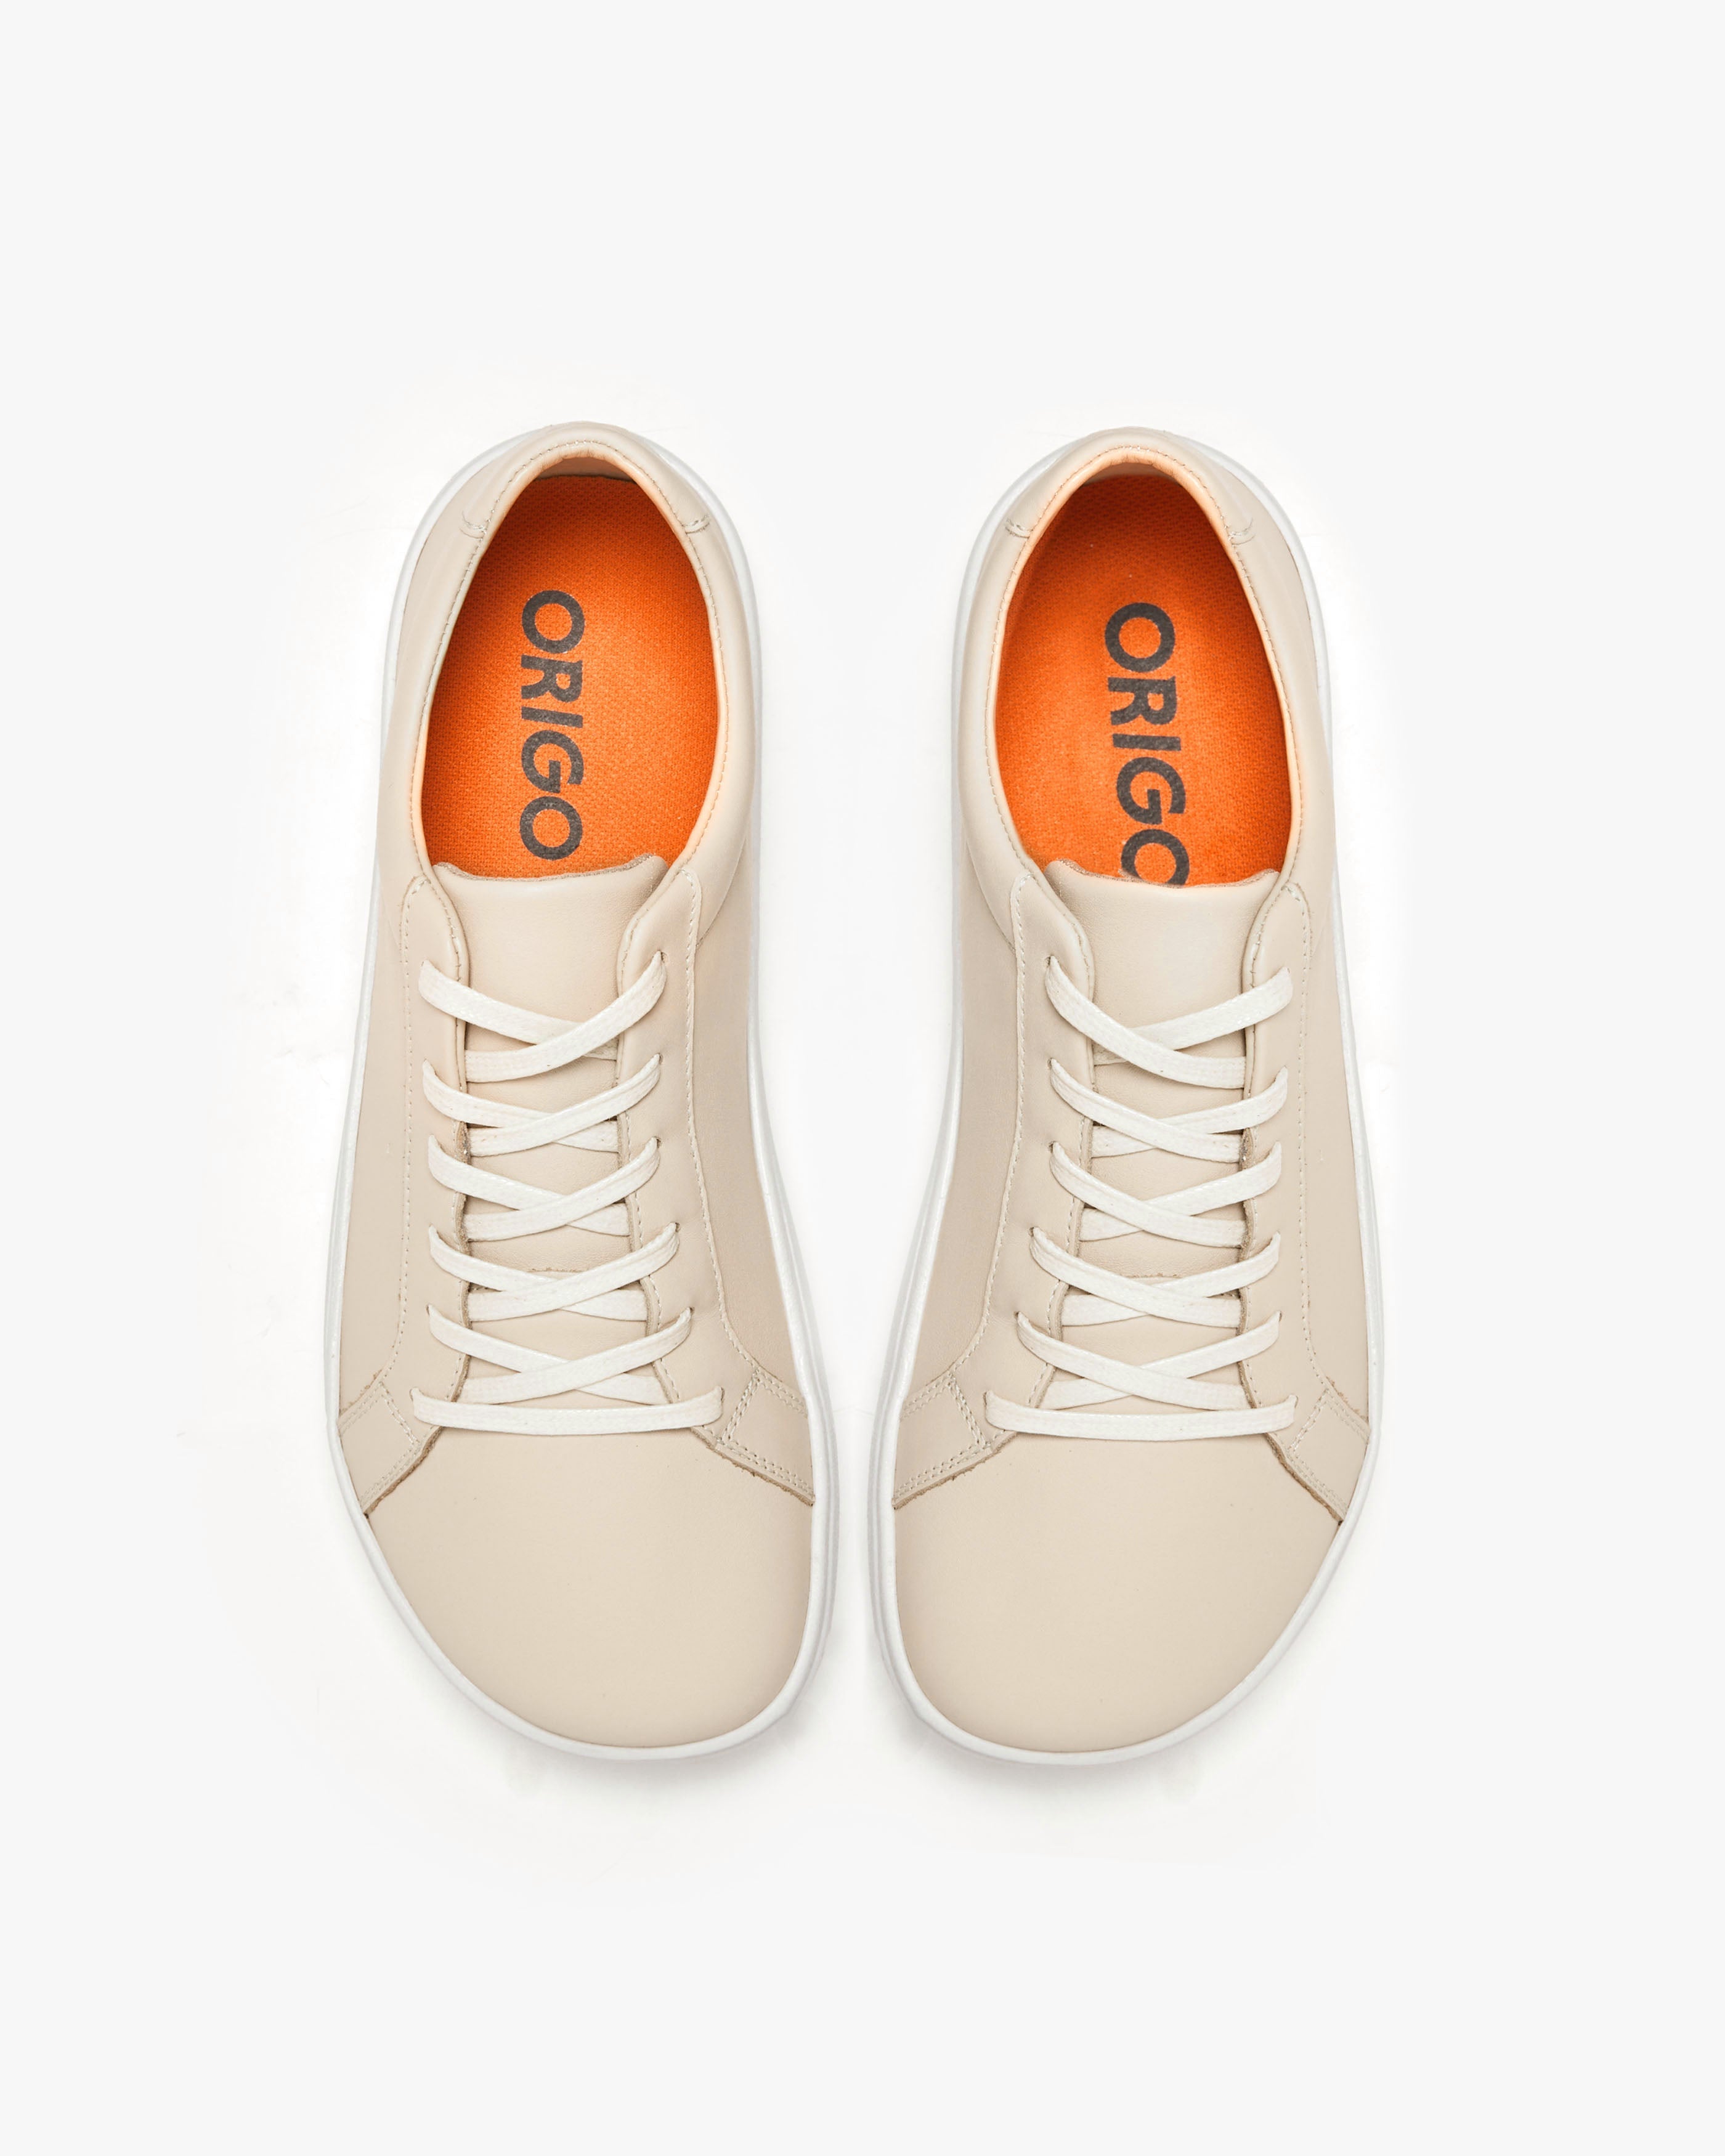 The Everyday Sneaker for Men - Final Sale | Gen 3 in Natural Leather-4